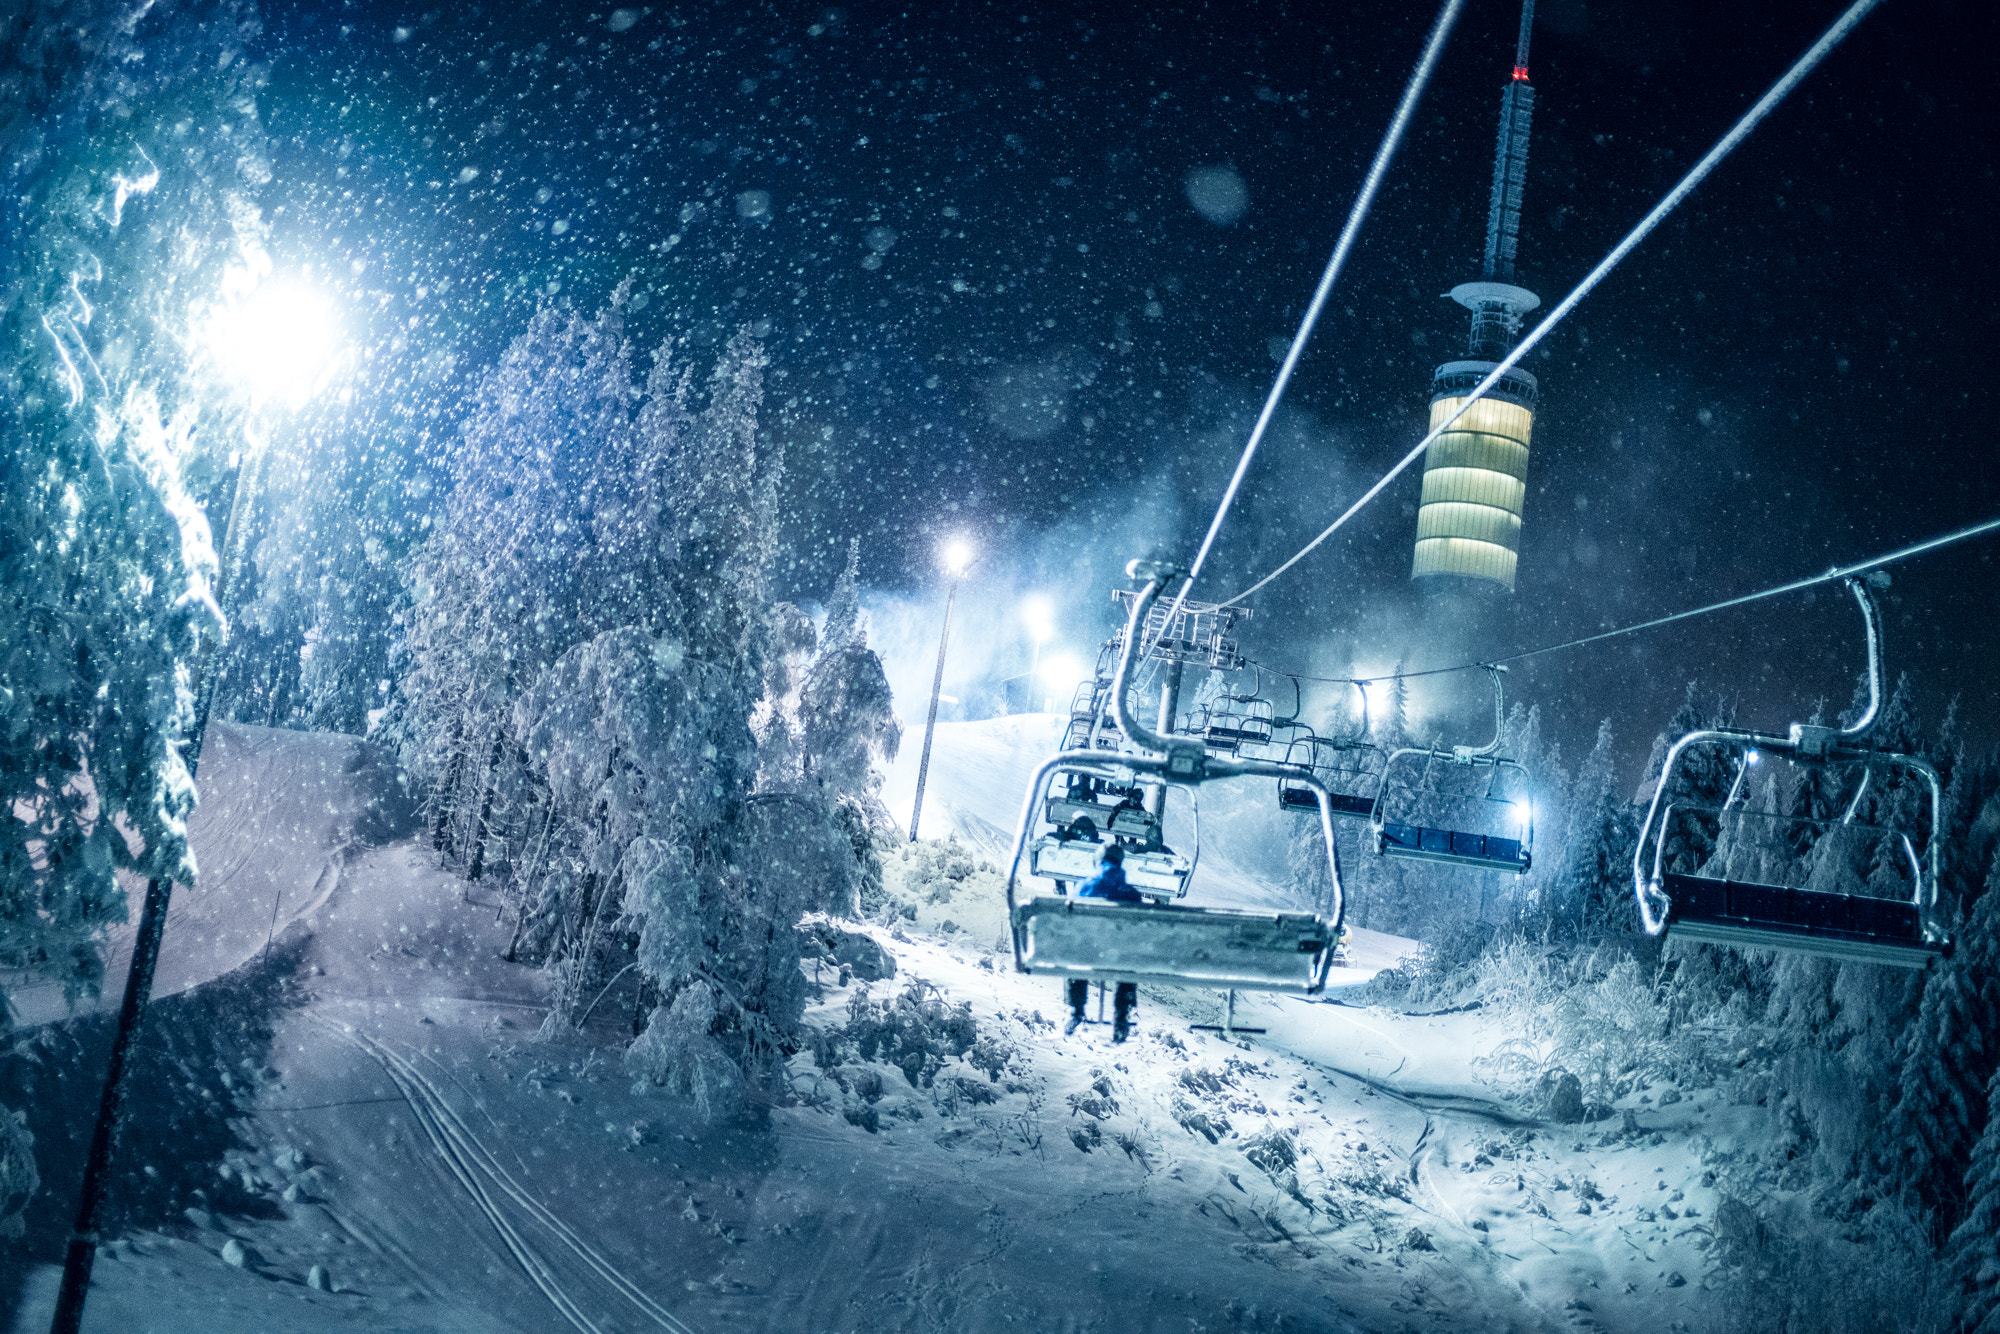 Sony a99 II sample photo. Snowy chairlift at night photography